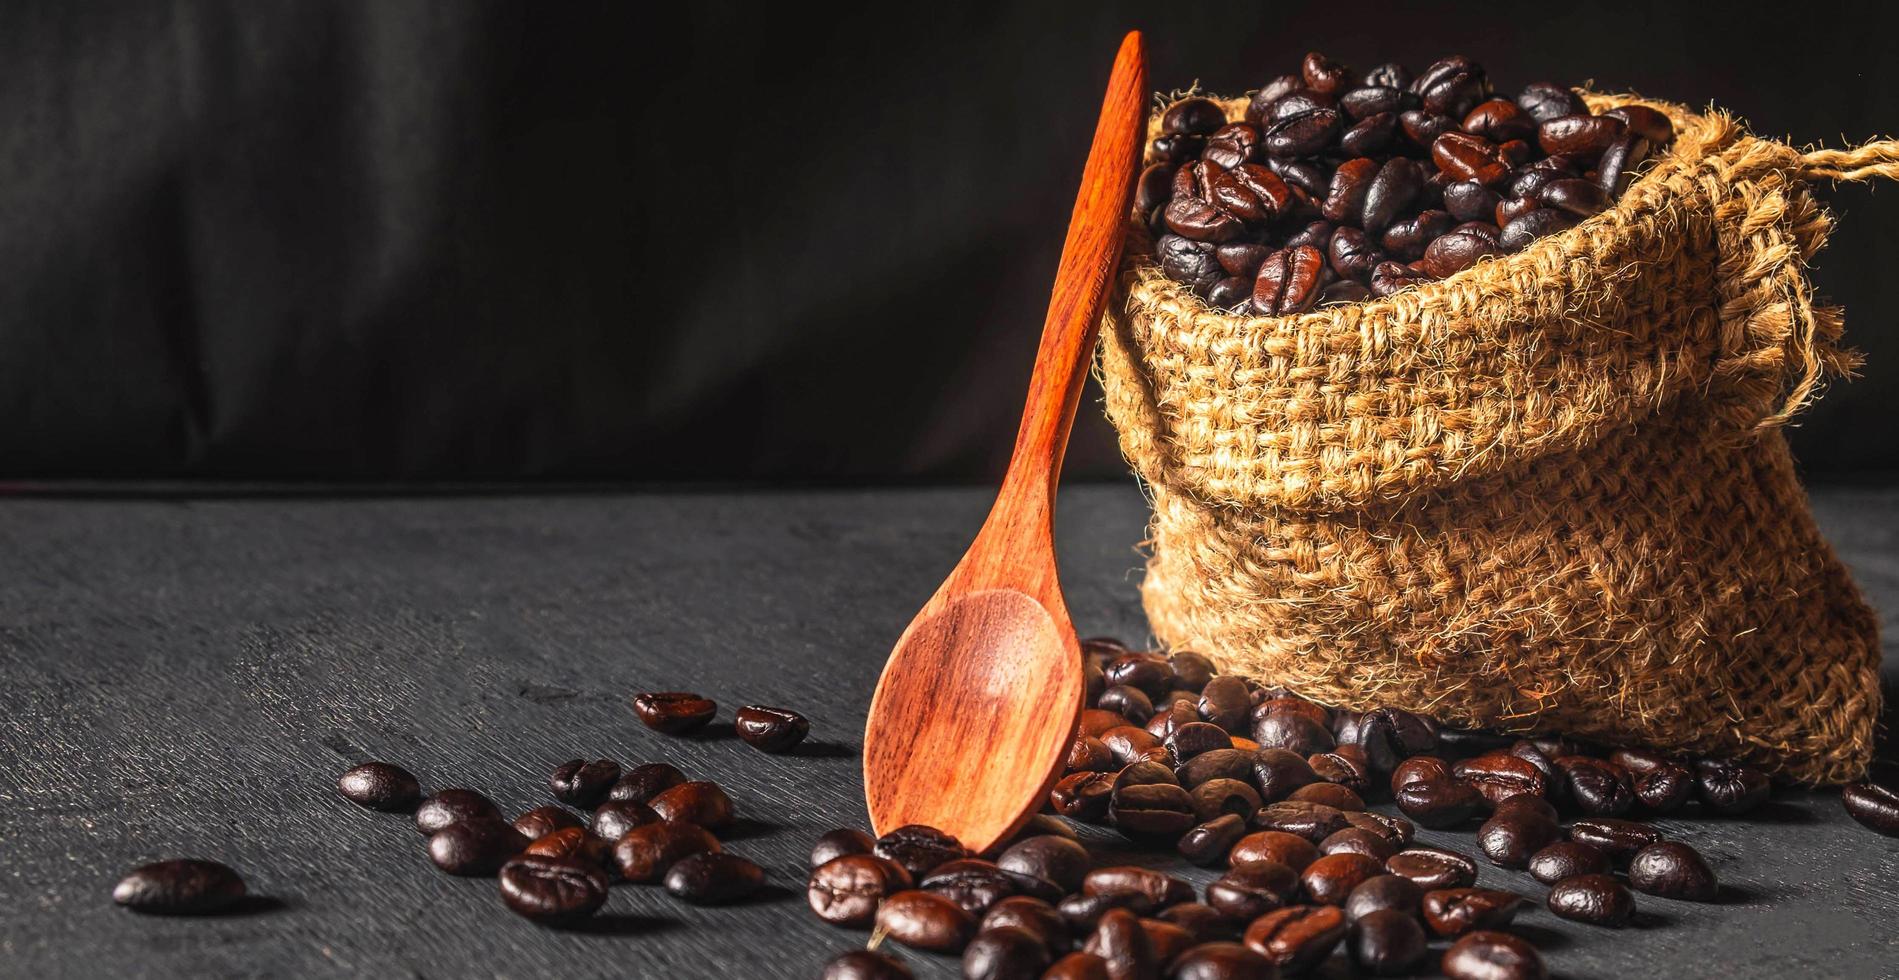 Product brown roasted coffee beans in a brown sack bag with wooden spoon on black wooden background photo